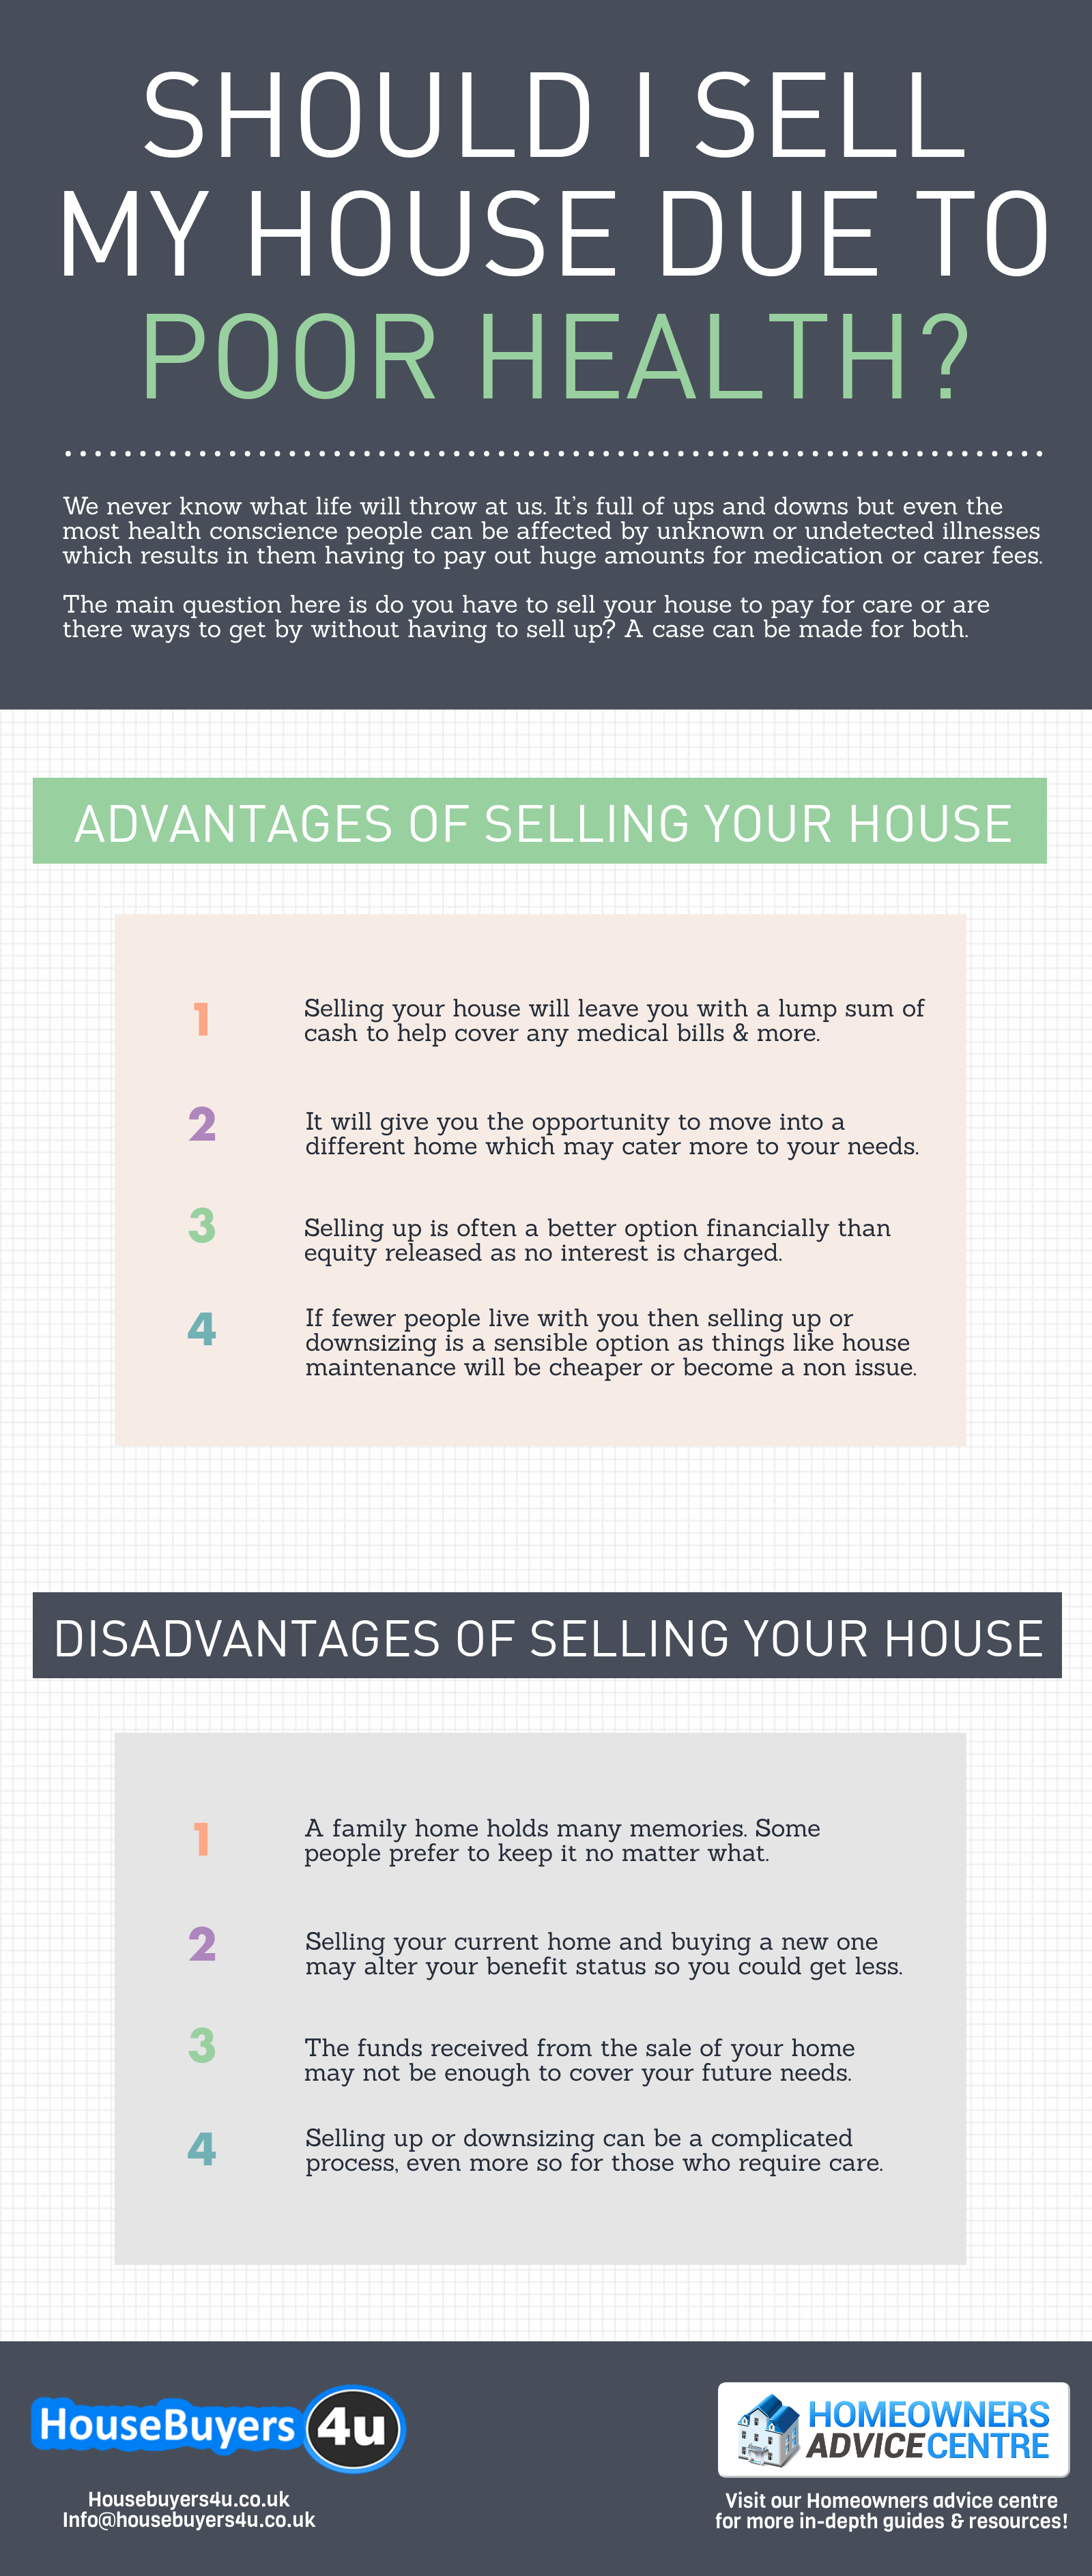 An infographic detailing the advantages and disadvantages about selling your home if you have poor health